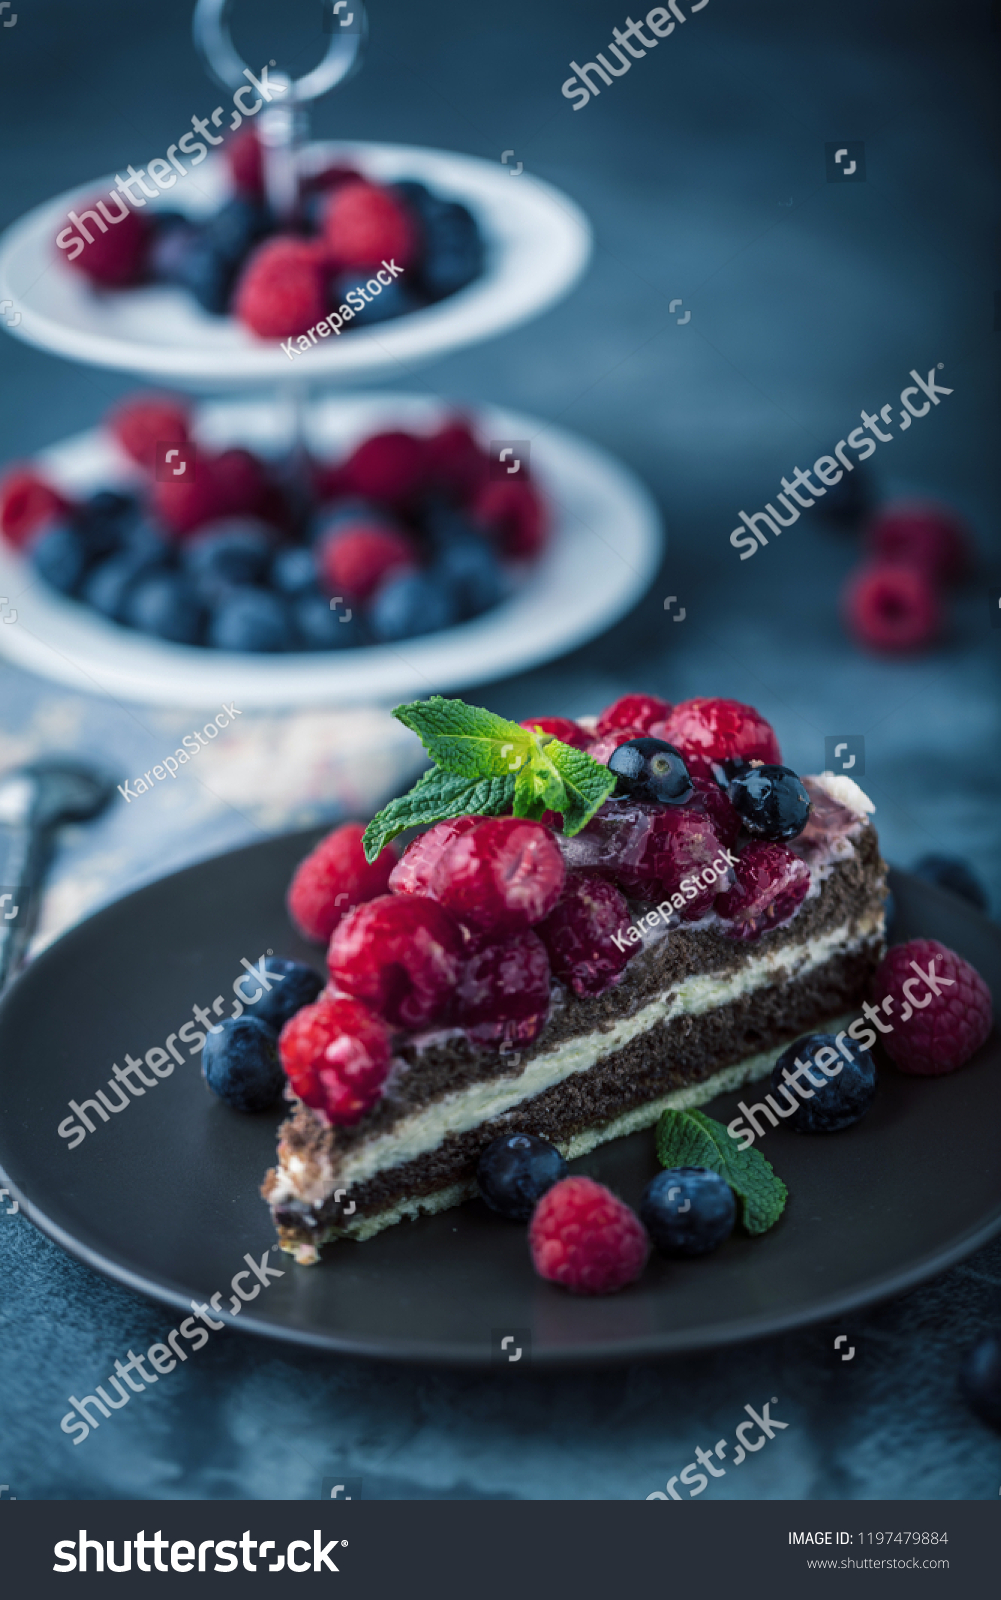 Portion of layered creamy fruit cake with in close up view #1197479884